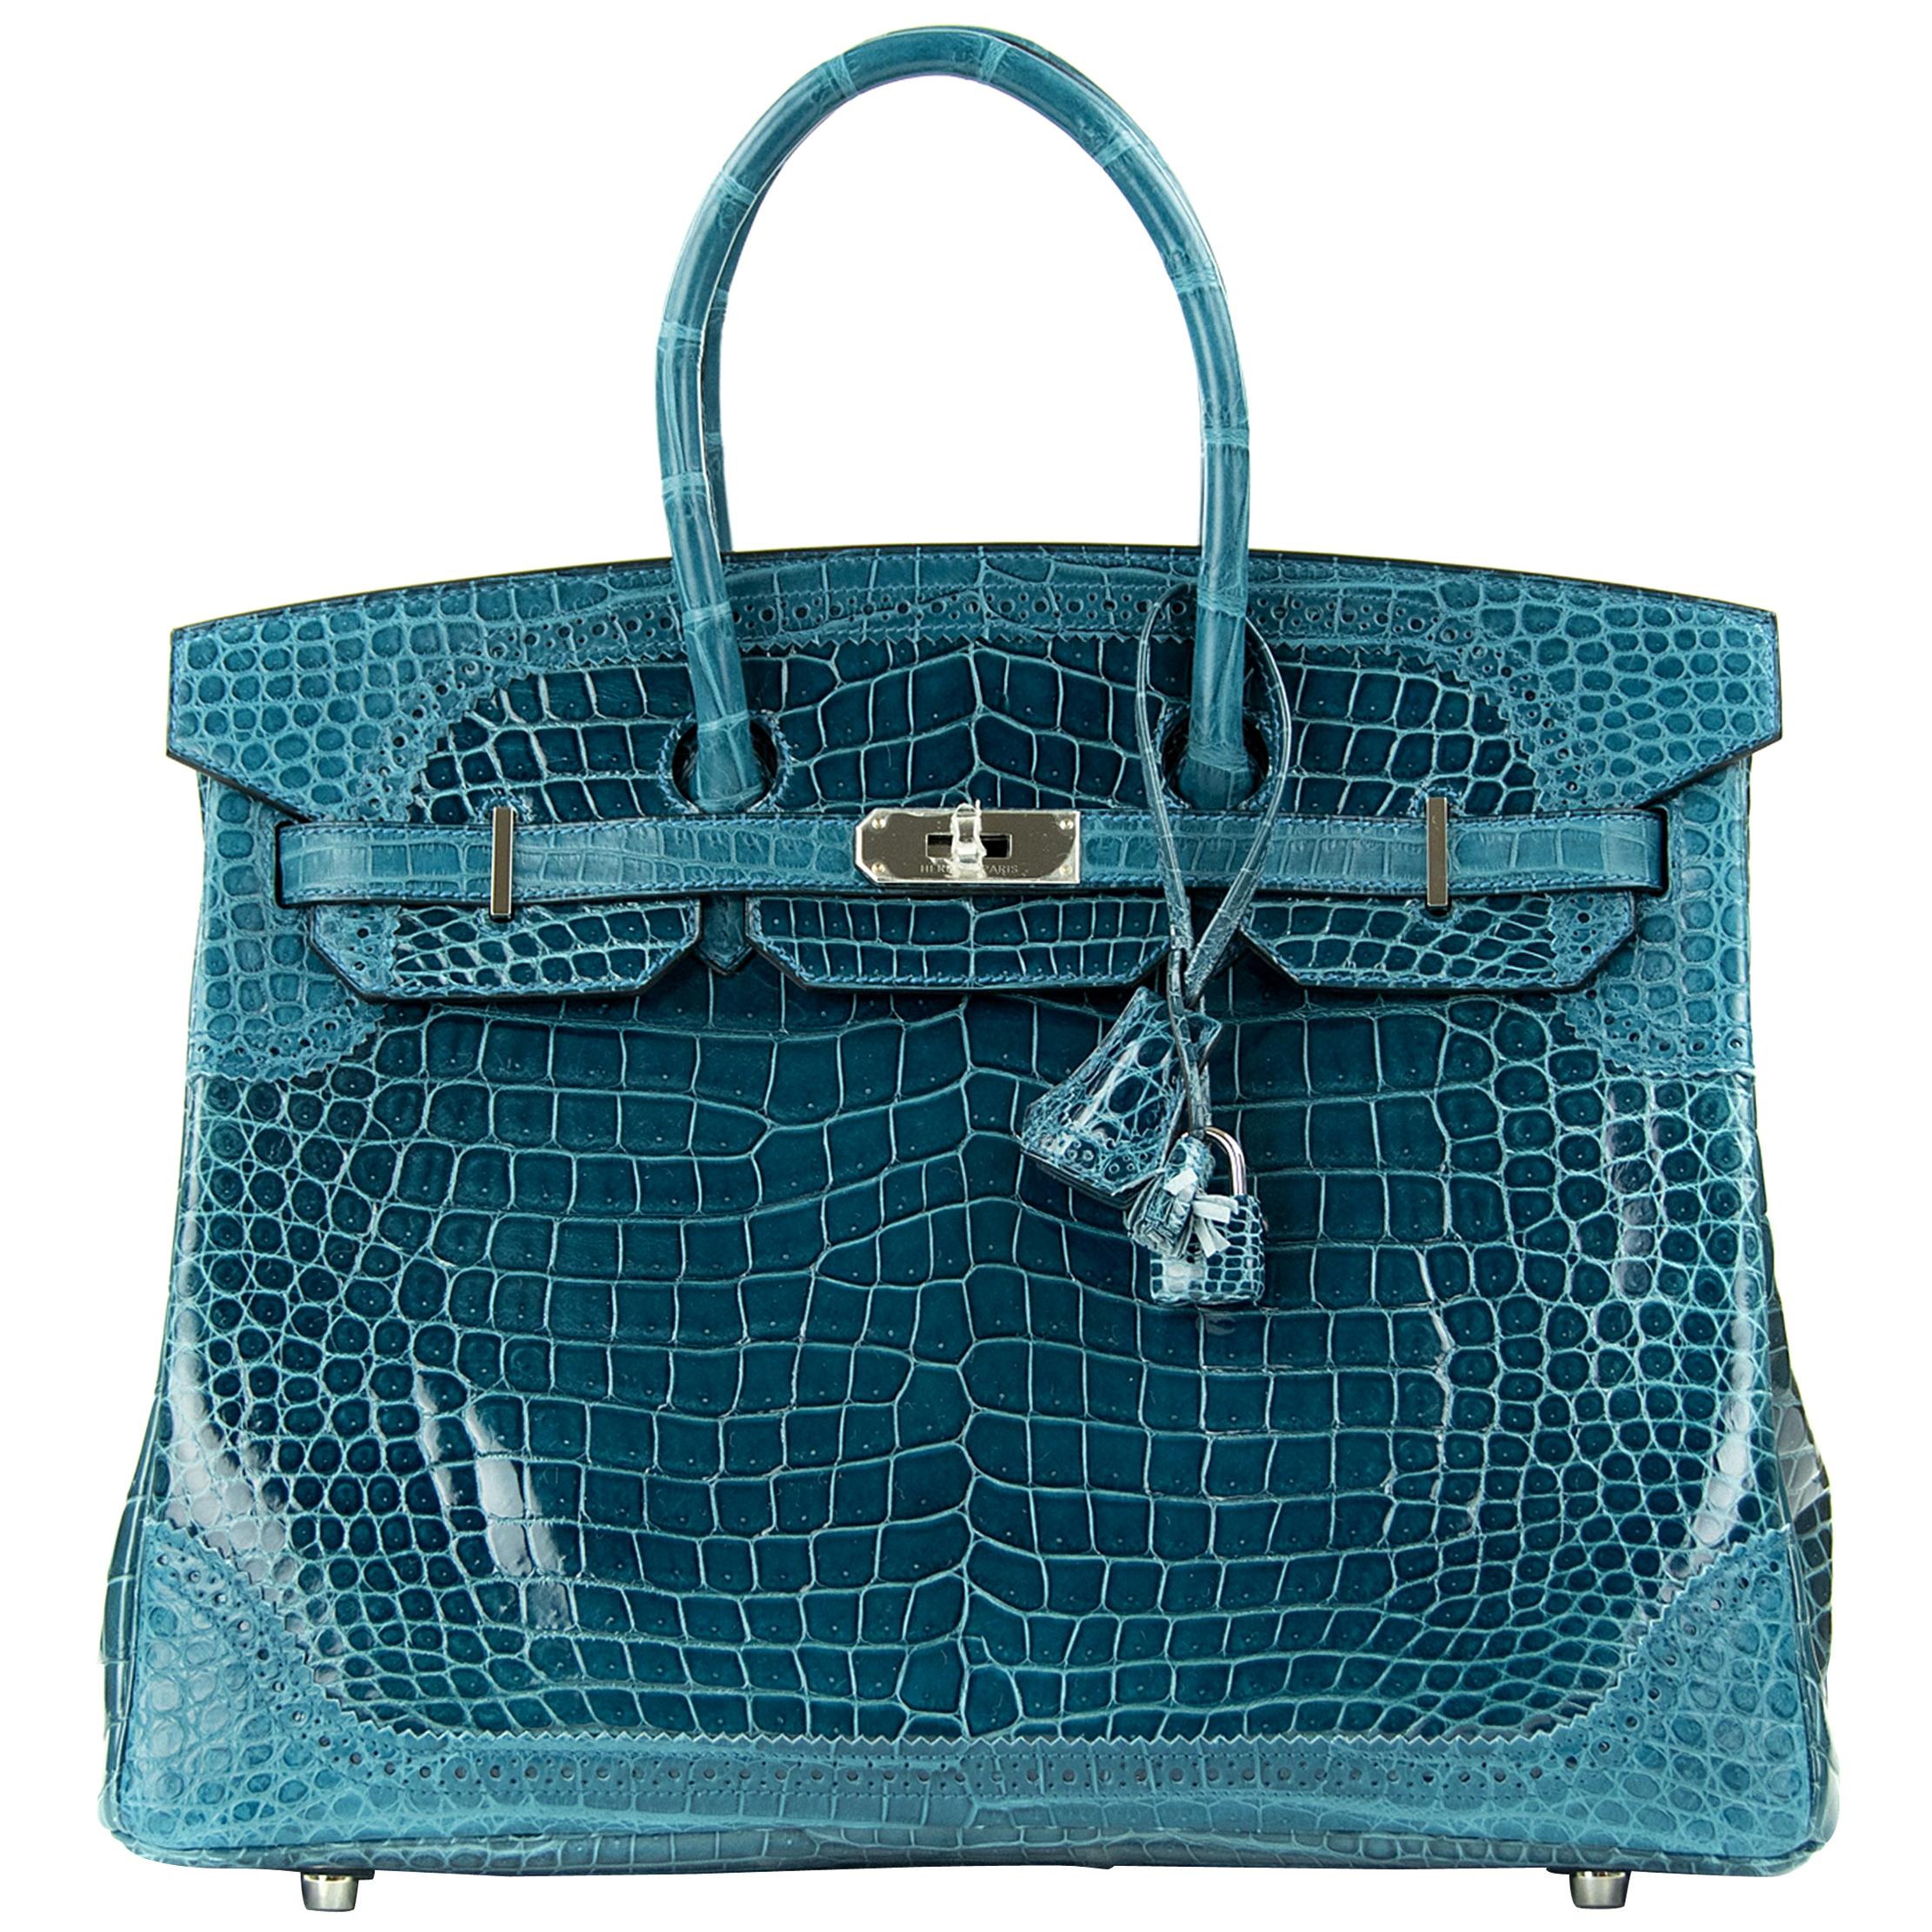 Limited Edition Hermes Birkin Ghillies Bag 35cm Shiny and Matte Bleu Colvert PHW For Sale